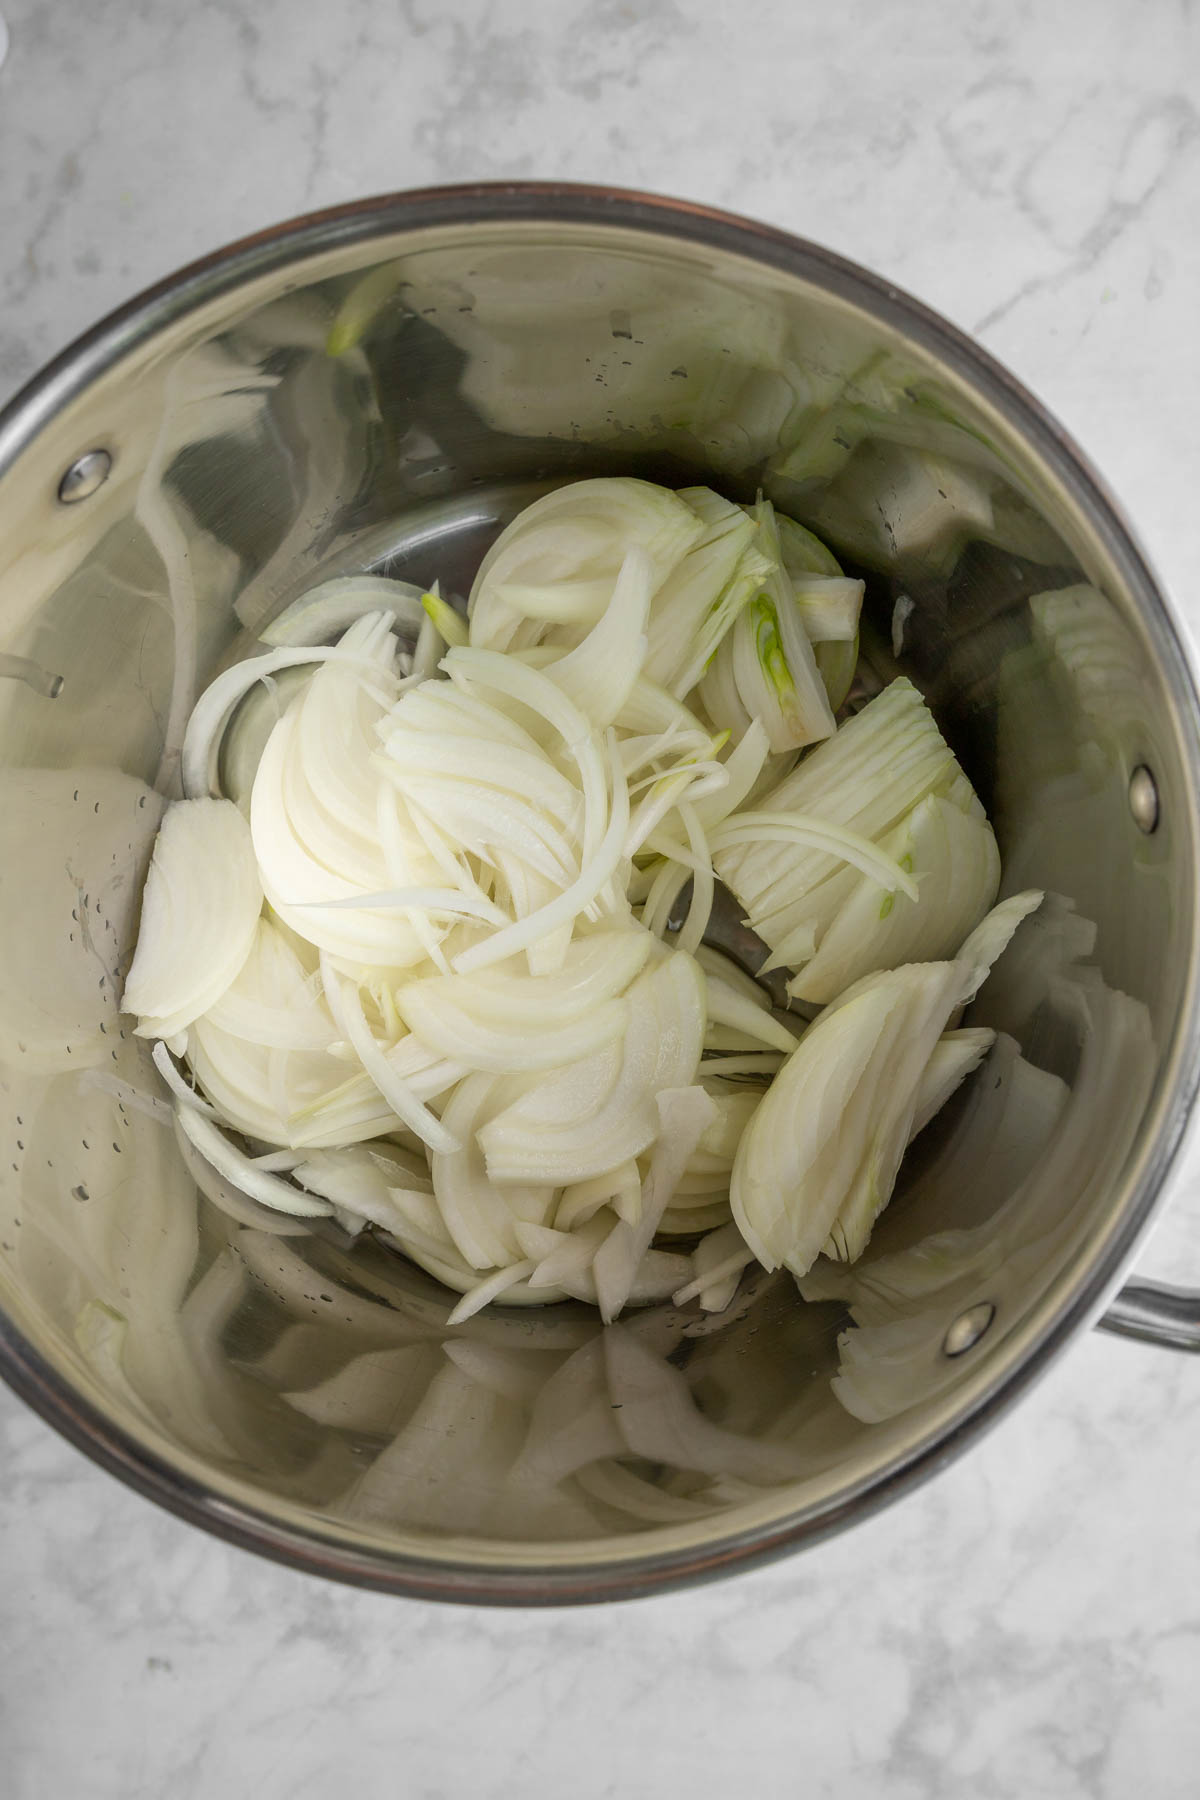 Onions in a saucepan before cooking.